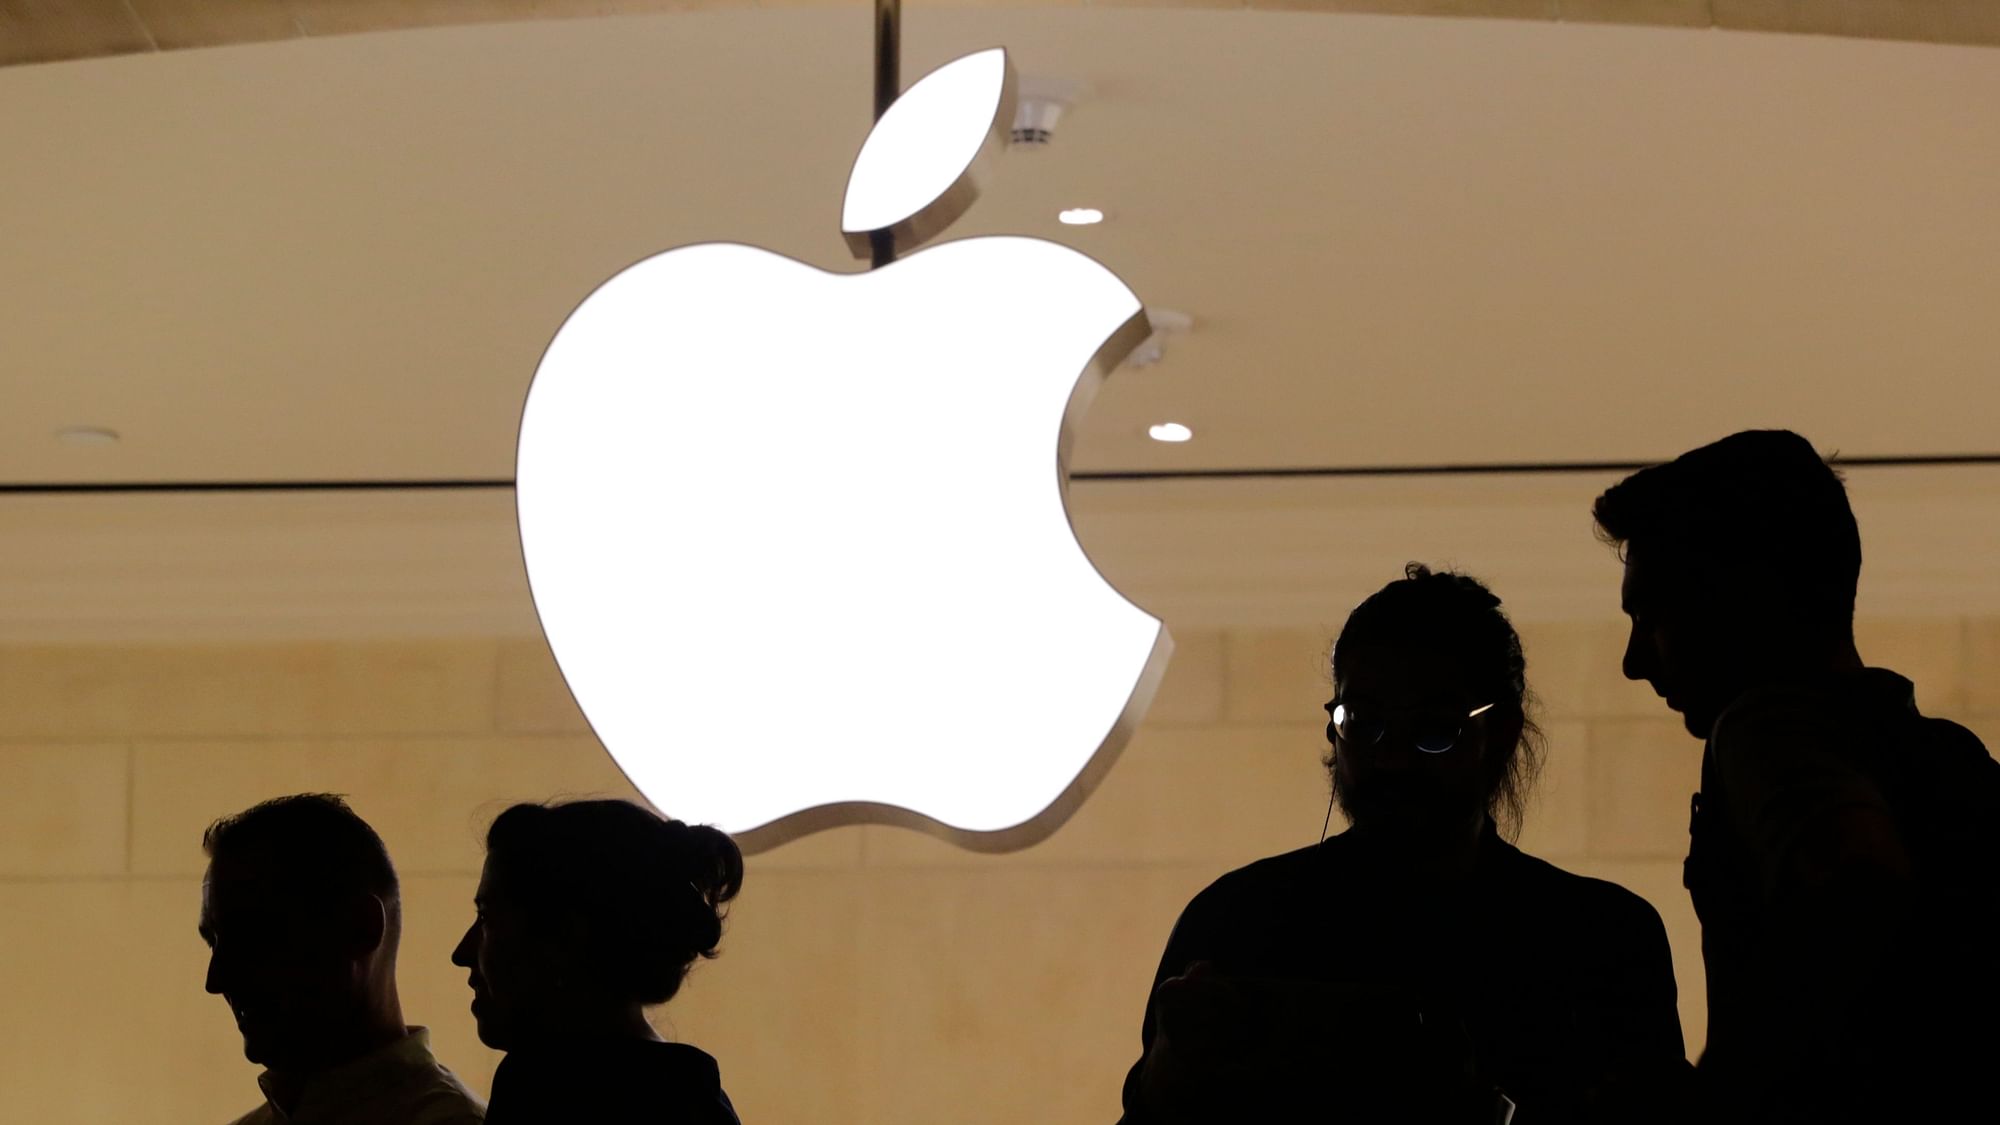 Apple and Qualcomm have also battled over how much Apple owes in licensing fees to Qualcomm.